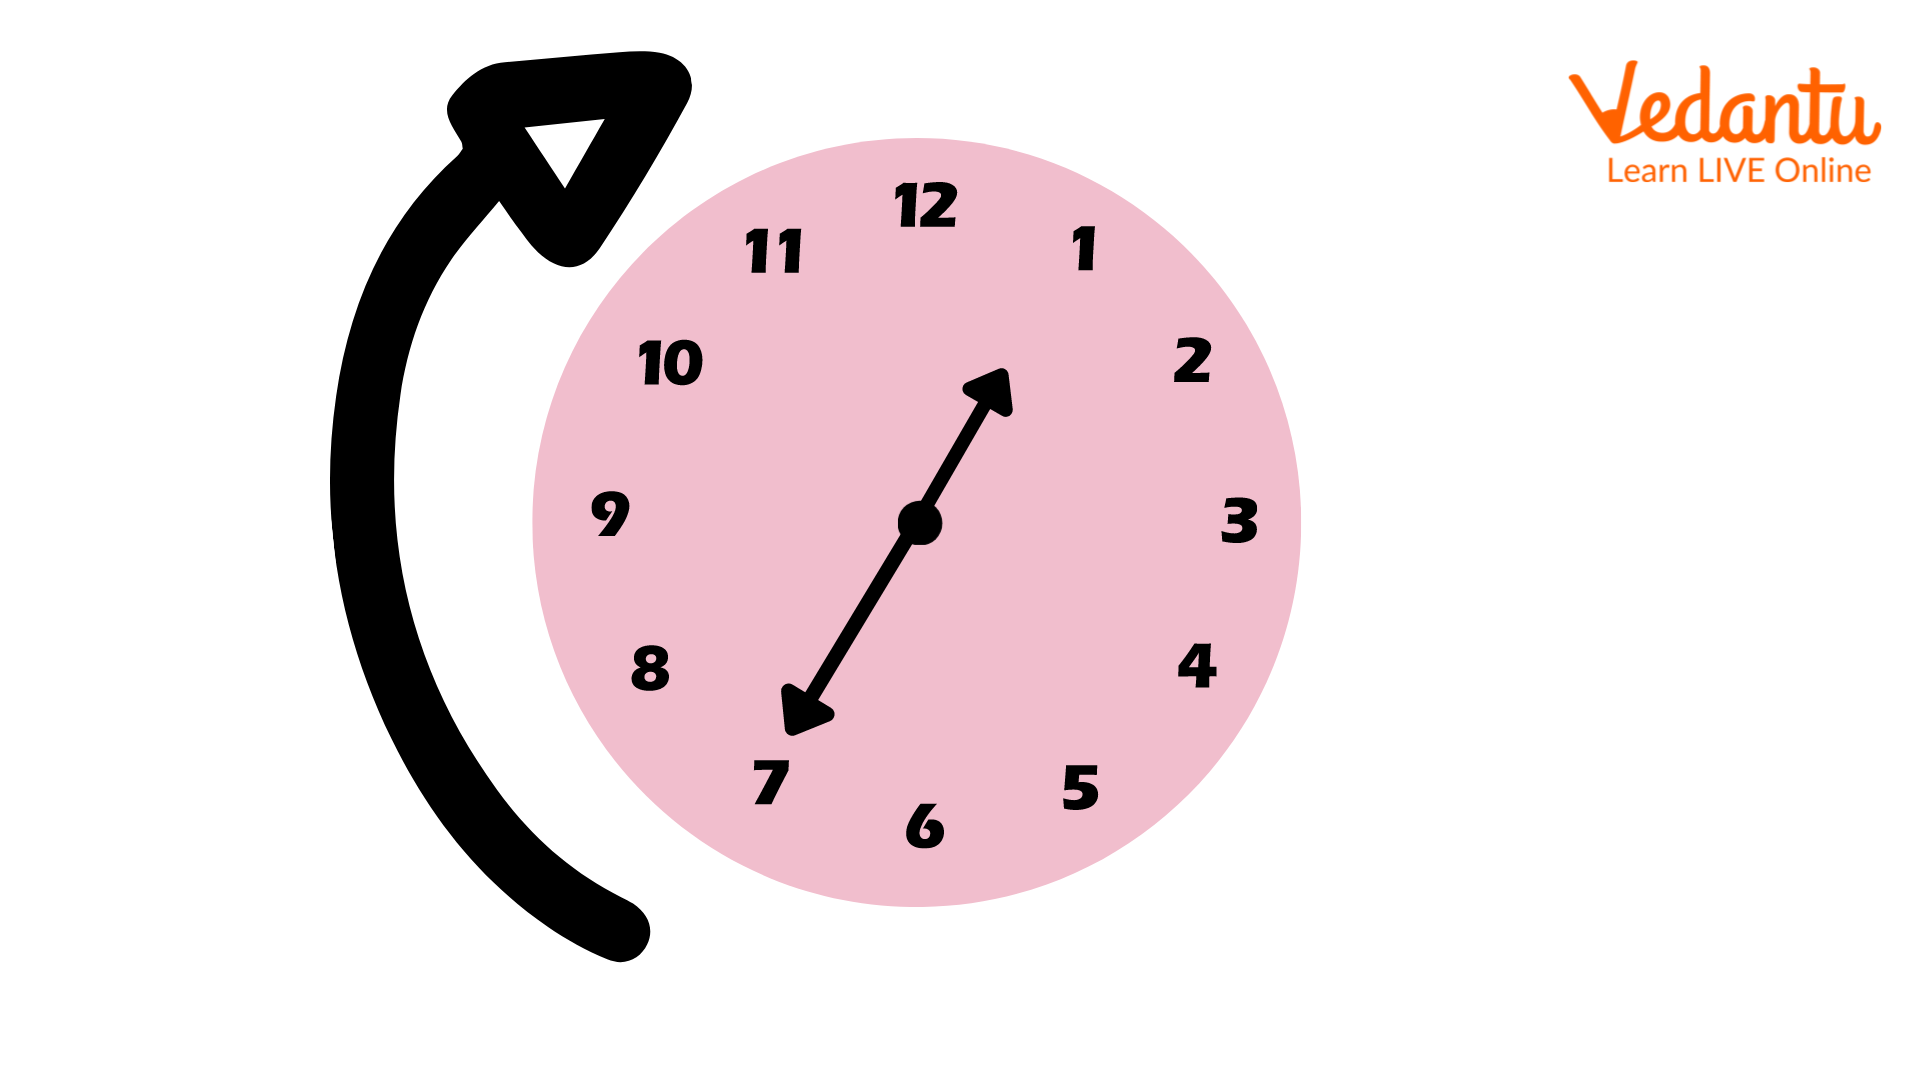 A clock showing twenty-five minutes to one.